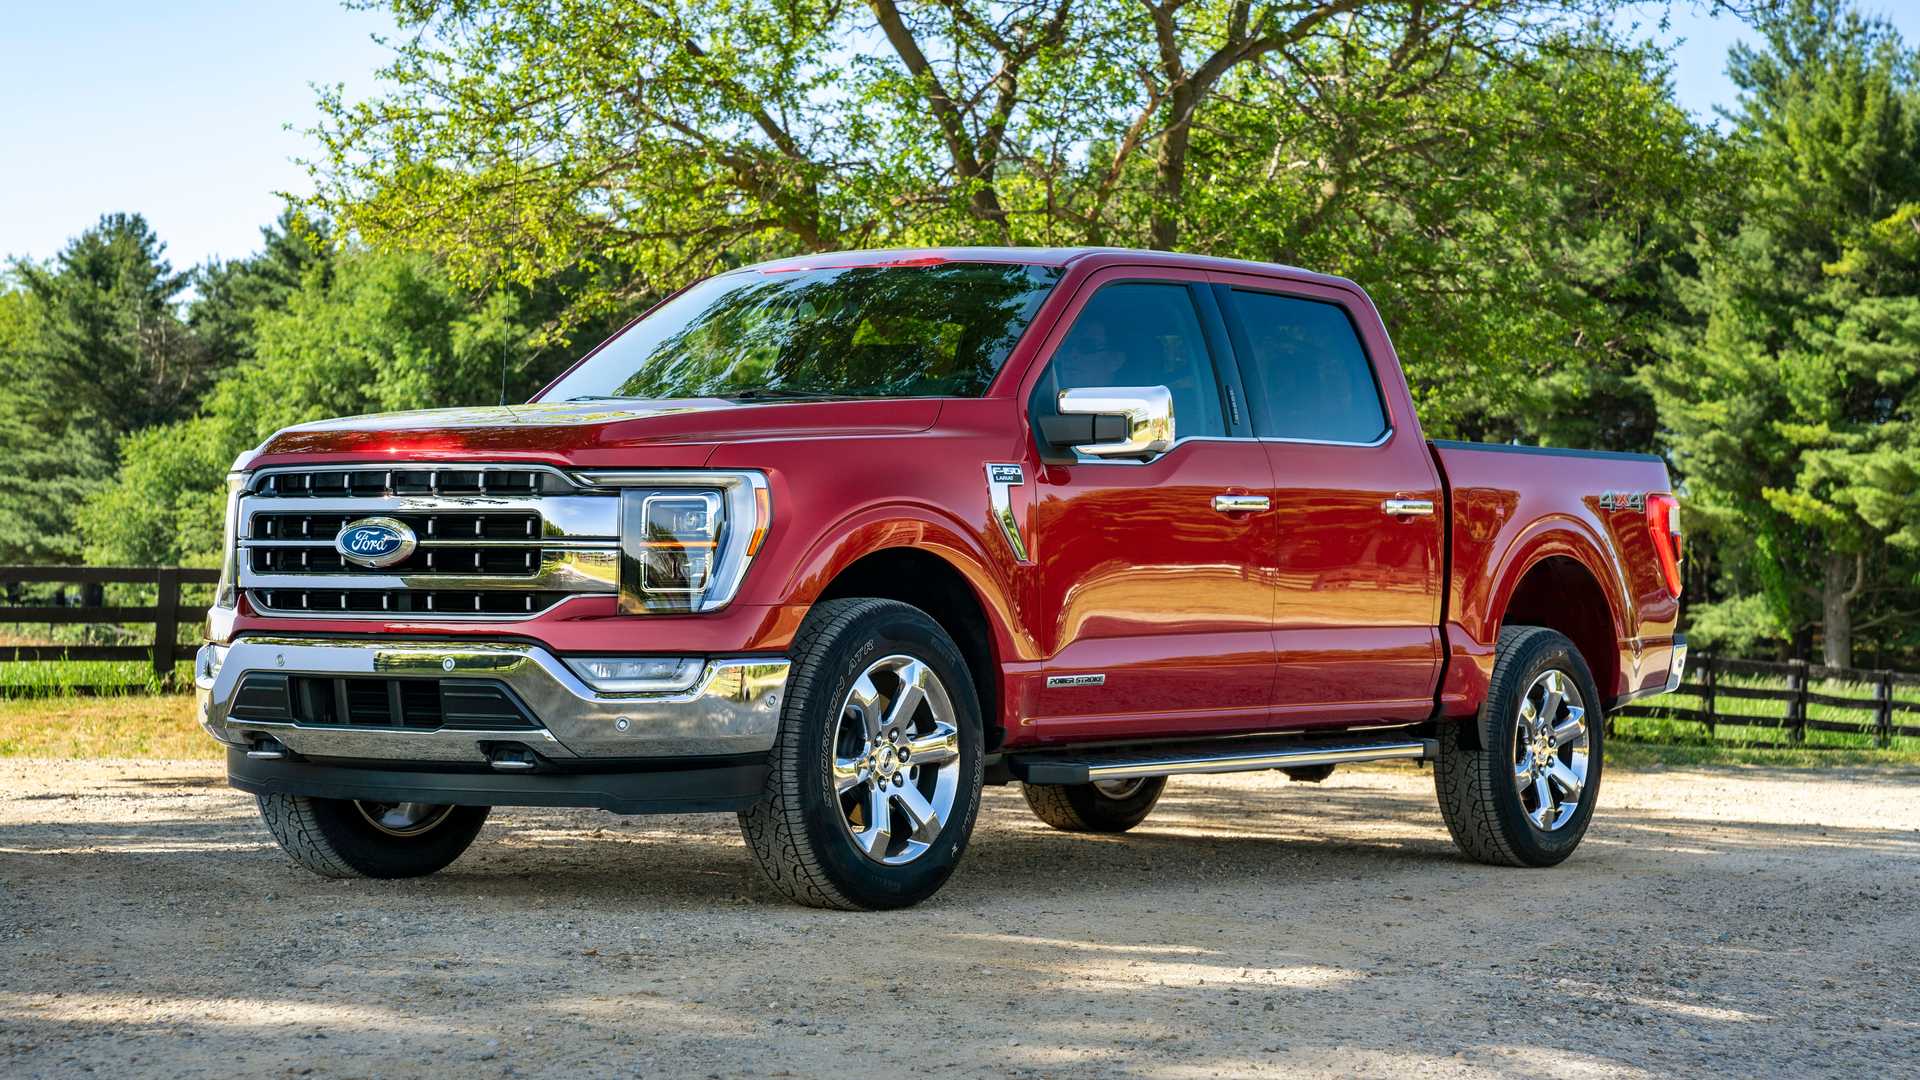 Free Download 2021 Ford F 150 Engines Detailed Hybrid Rated At 430 HP And 570 LB FT [1920x1080] For Your Desktop, Mobile & Tablet. Explore Ford F 150 2021 Wallpaper